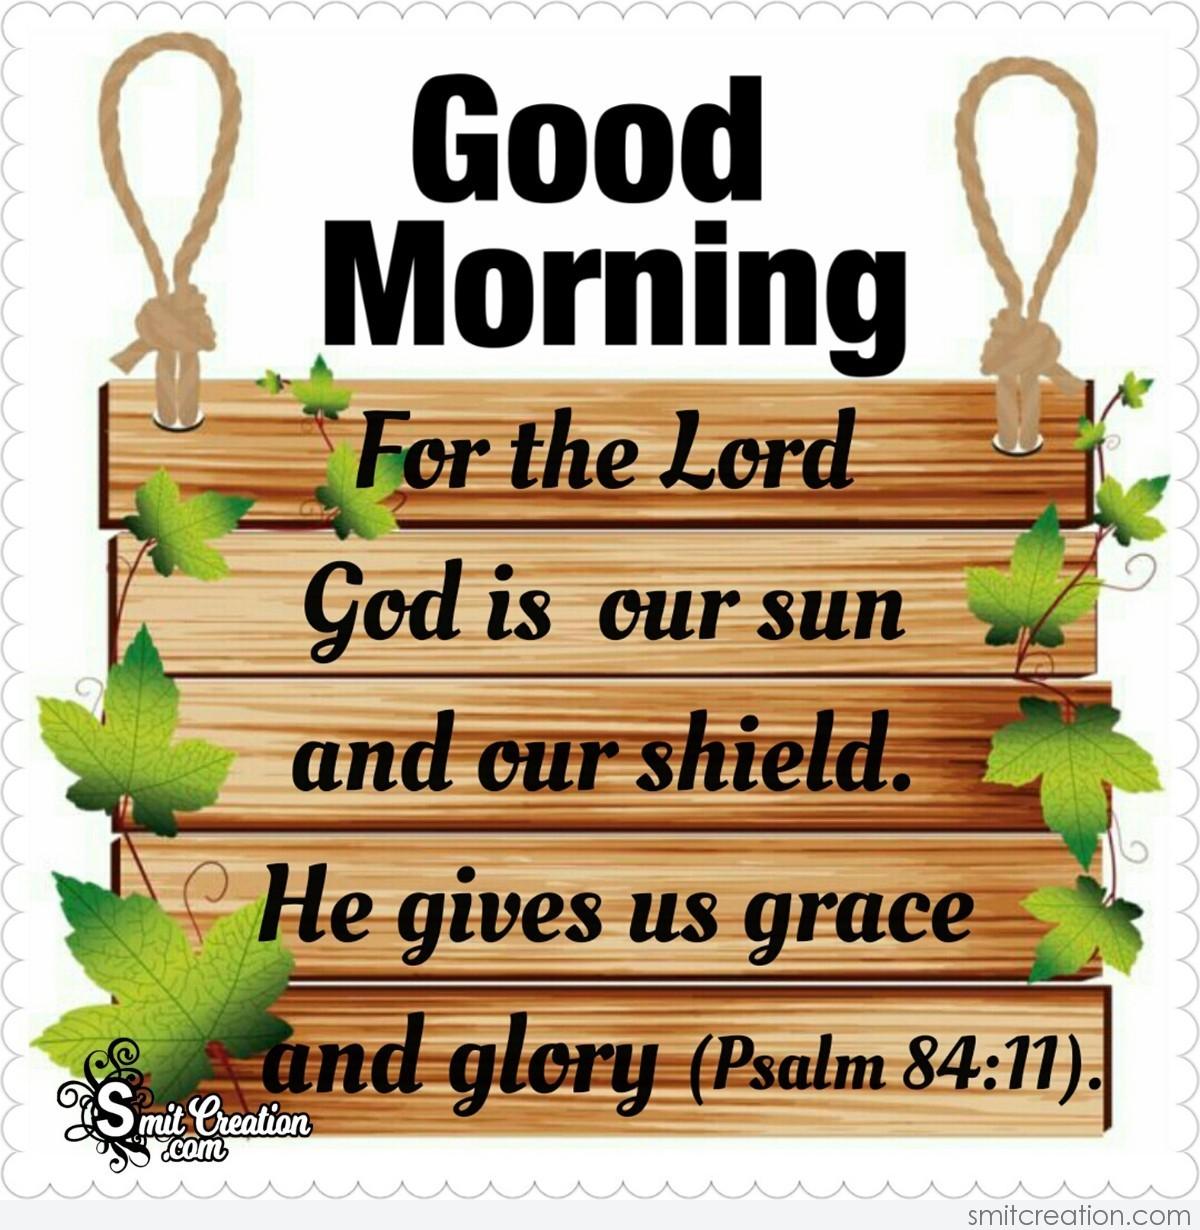 Good Morning Bible Verses Pictures and Graphics - SmitCreation.com